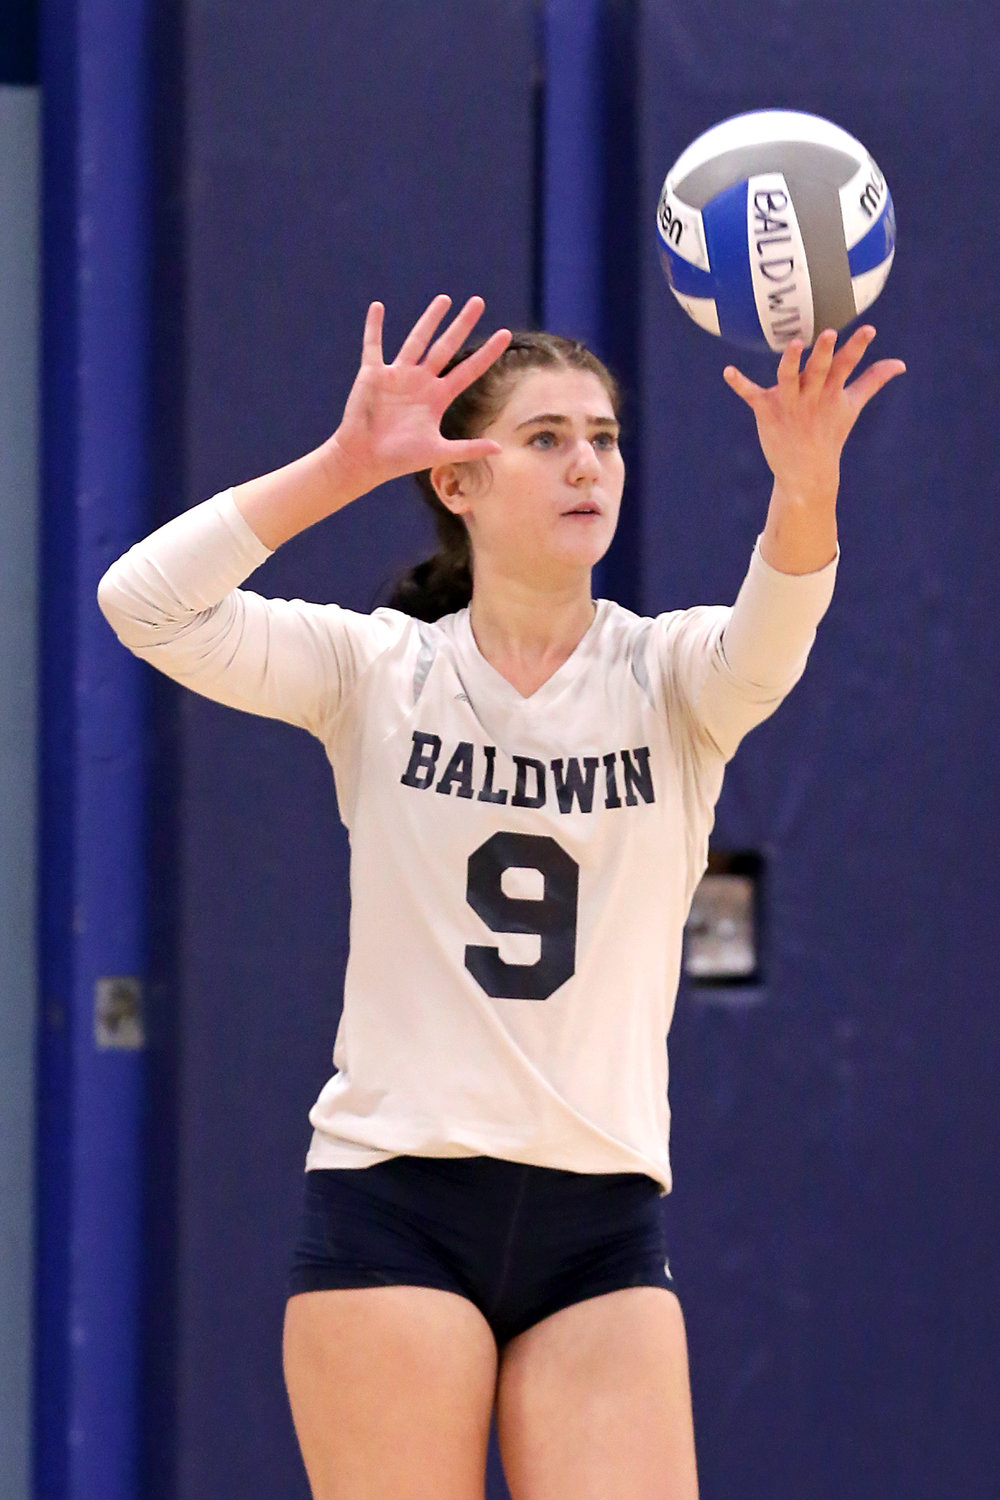 Senior hitter Ava Reyer is a key piece of the offensive puzzle for Baldwin, which is off to a roller coaster 2-3 start.